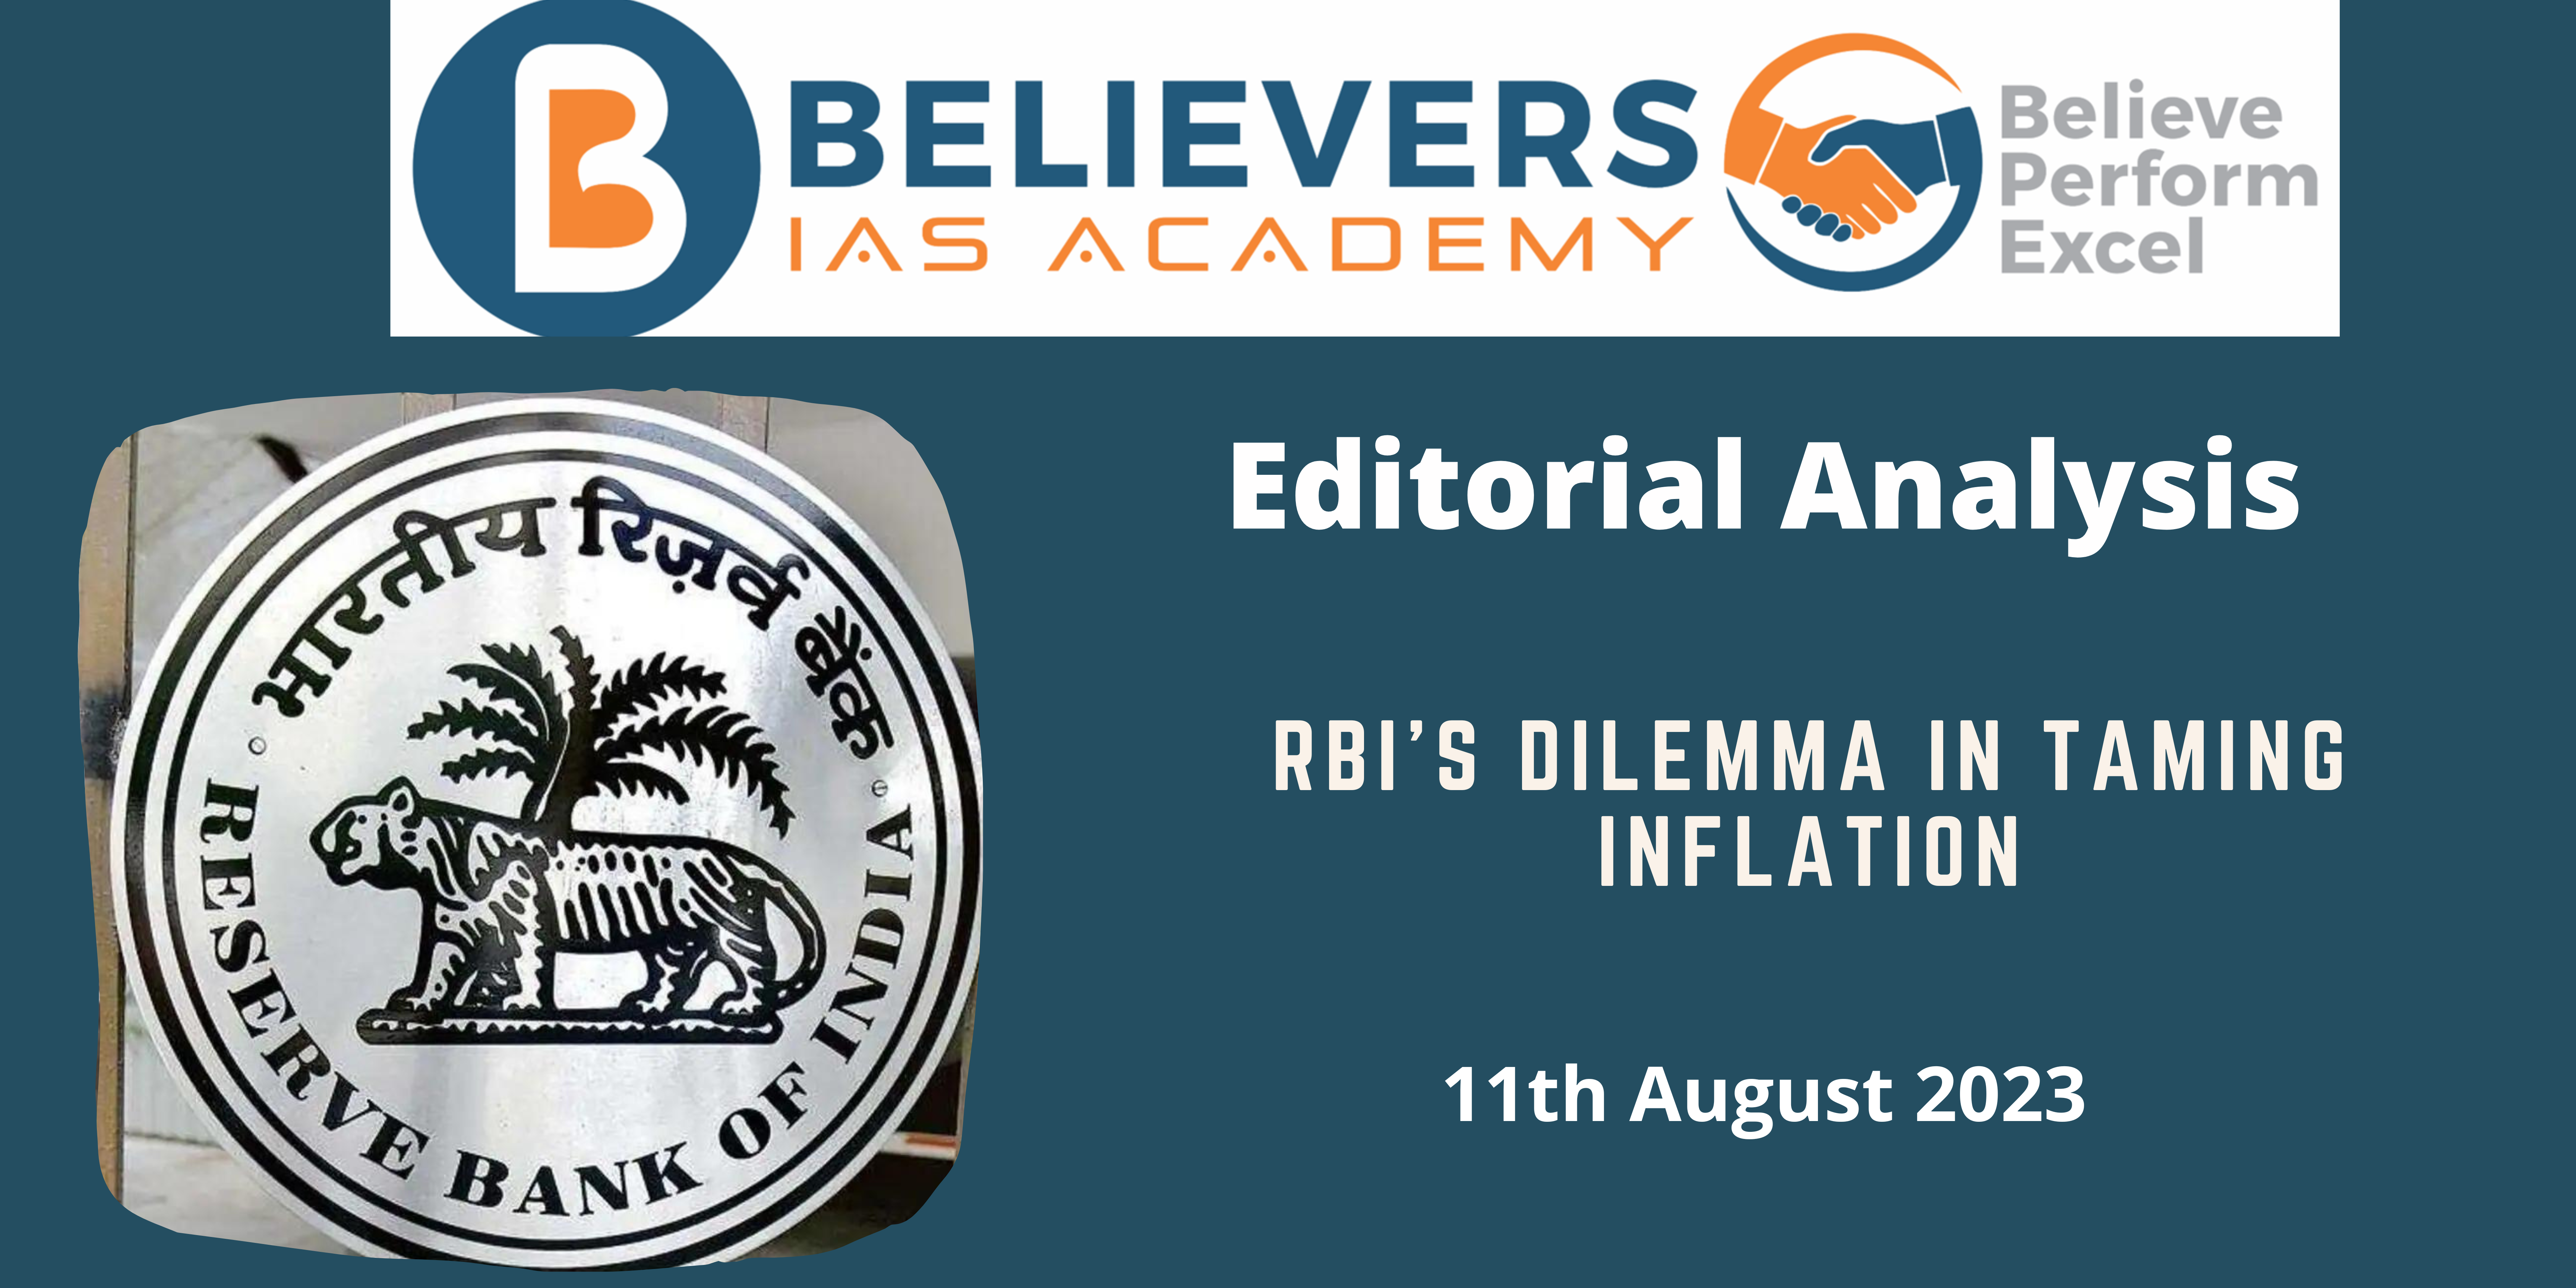 RBI's Dilemma in Taming Inflation